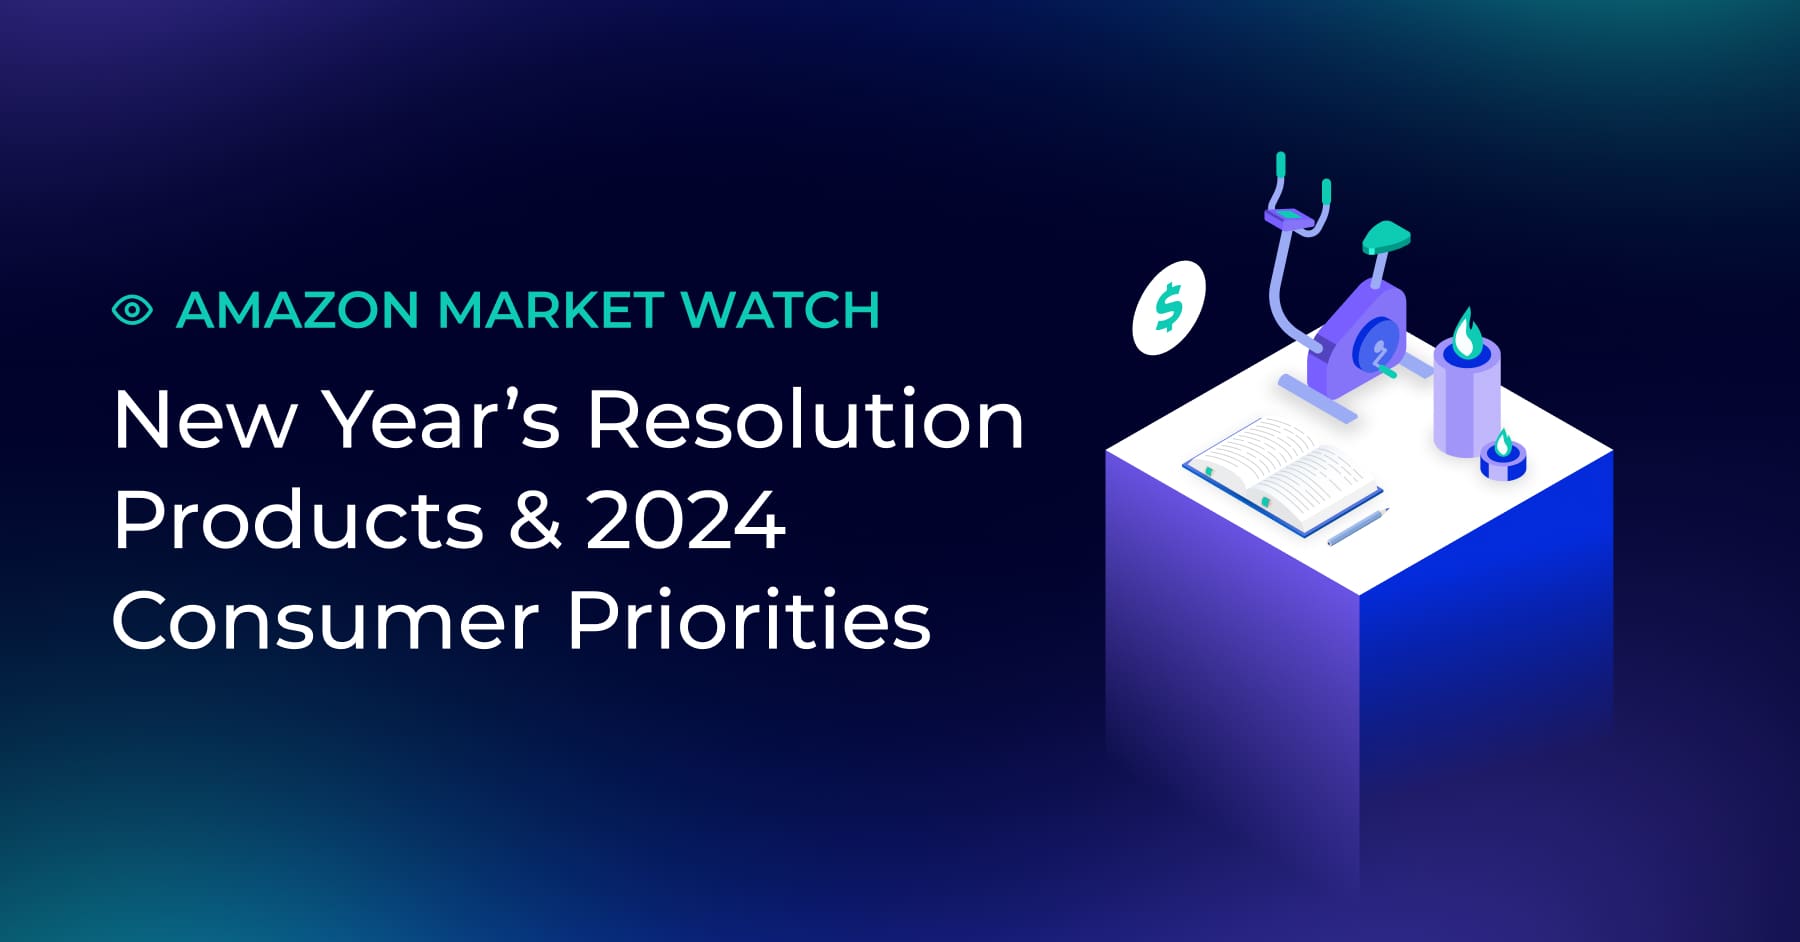 New Year’s Resolution Products & 2024 Consumer Priorities